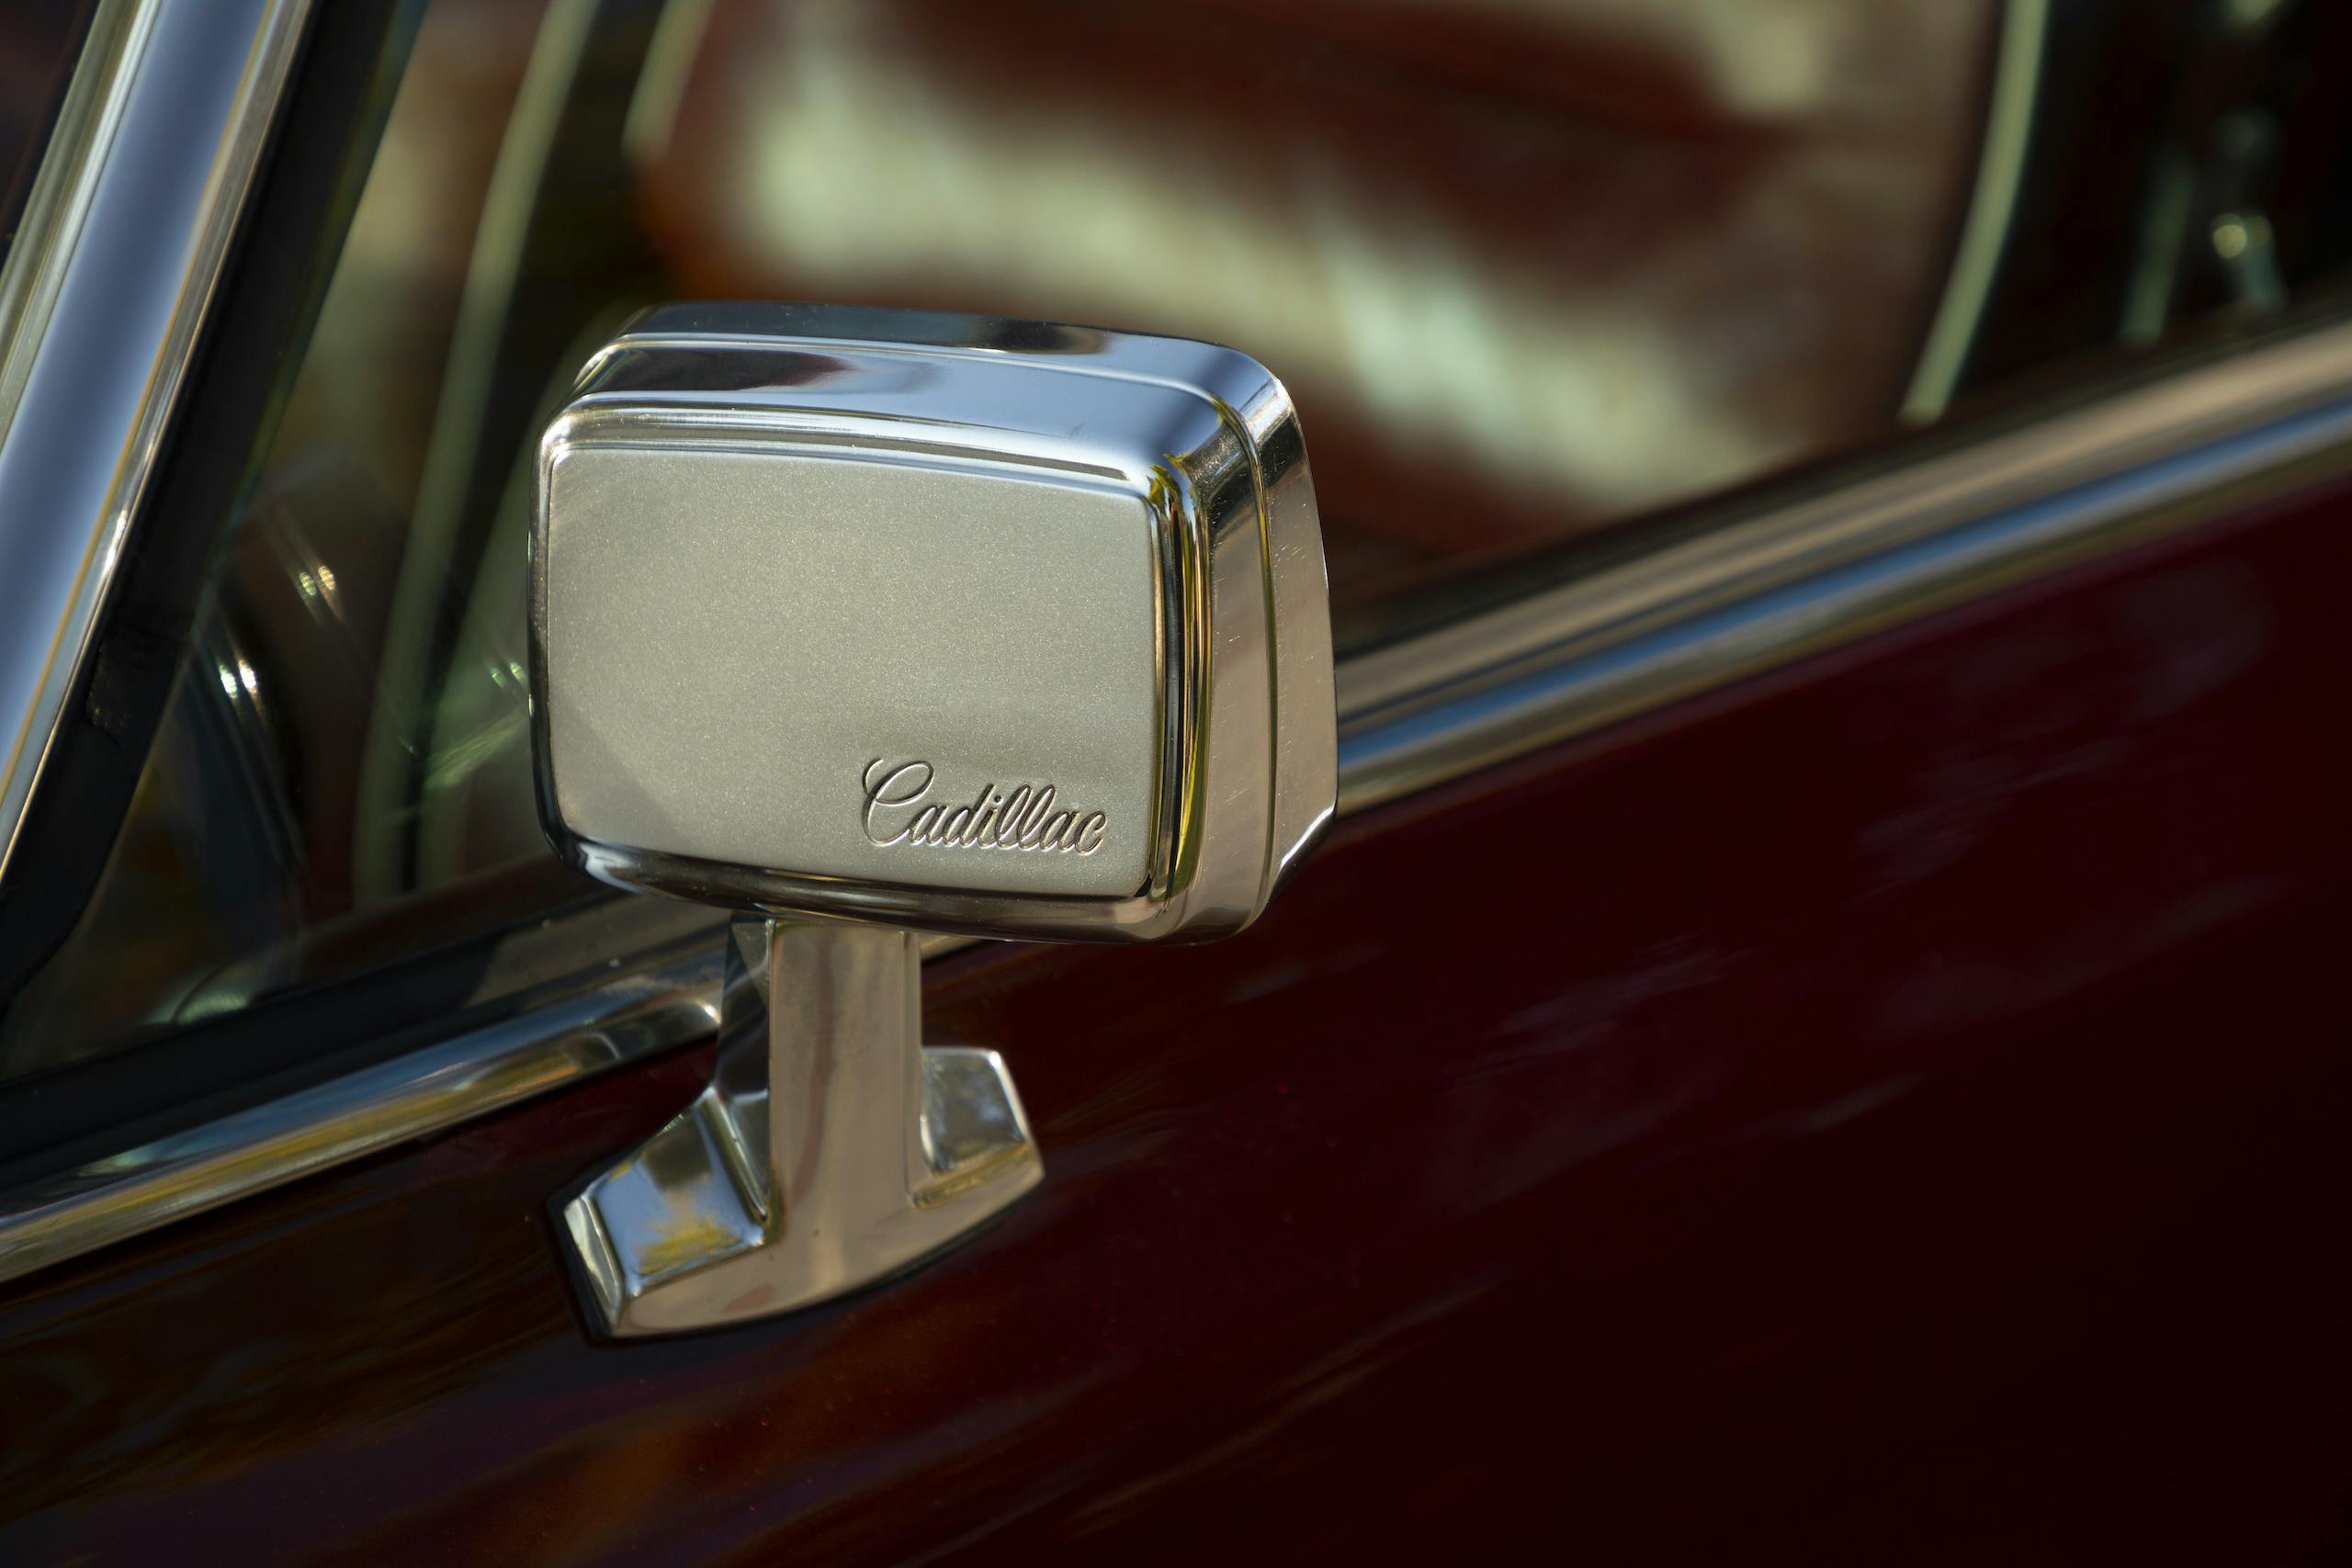 1976 Cadillac Coupe DeVille side view mirror detail